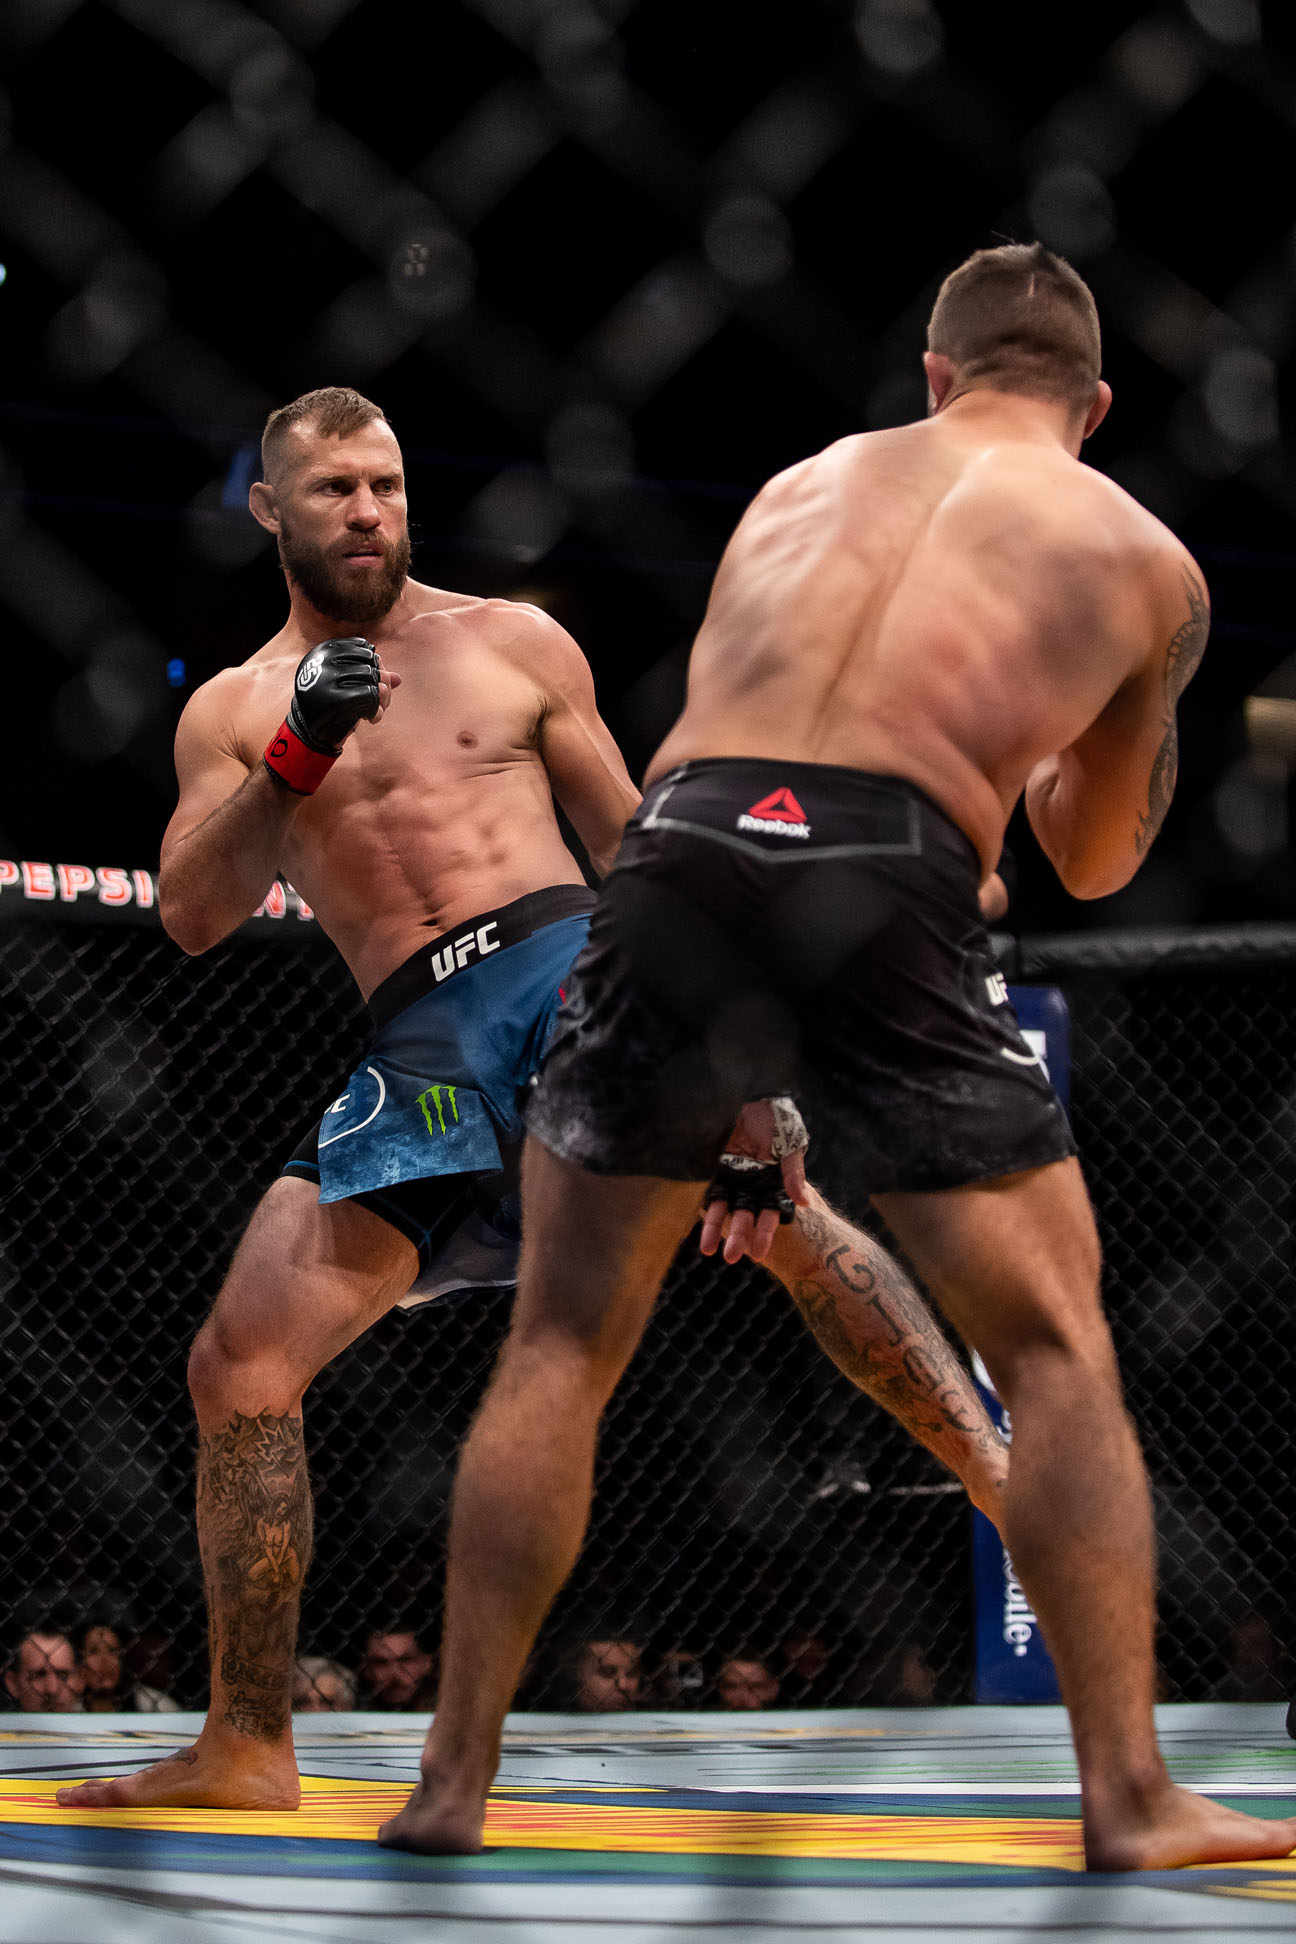 Monster Energy's Donald (Cowboy) Cerrone Breaks UFC Record Via Submission of Mike Perry